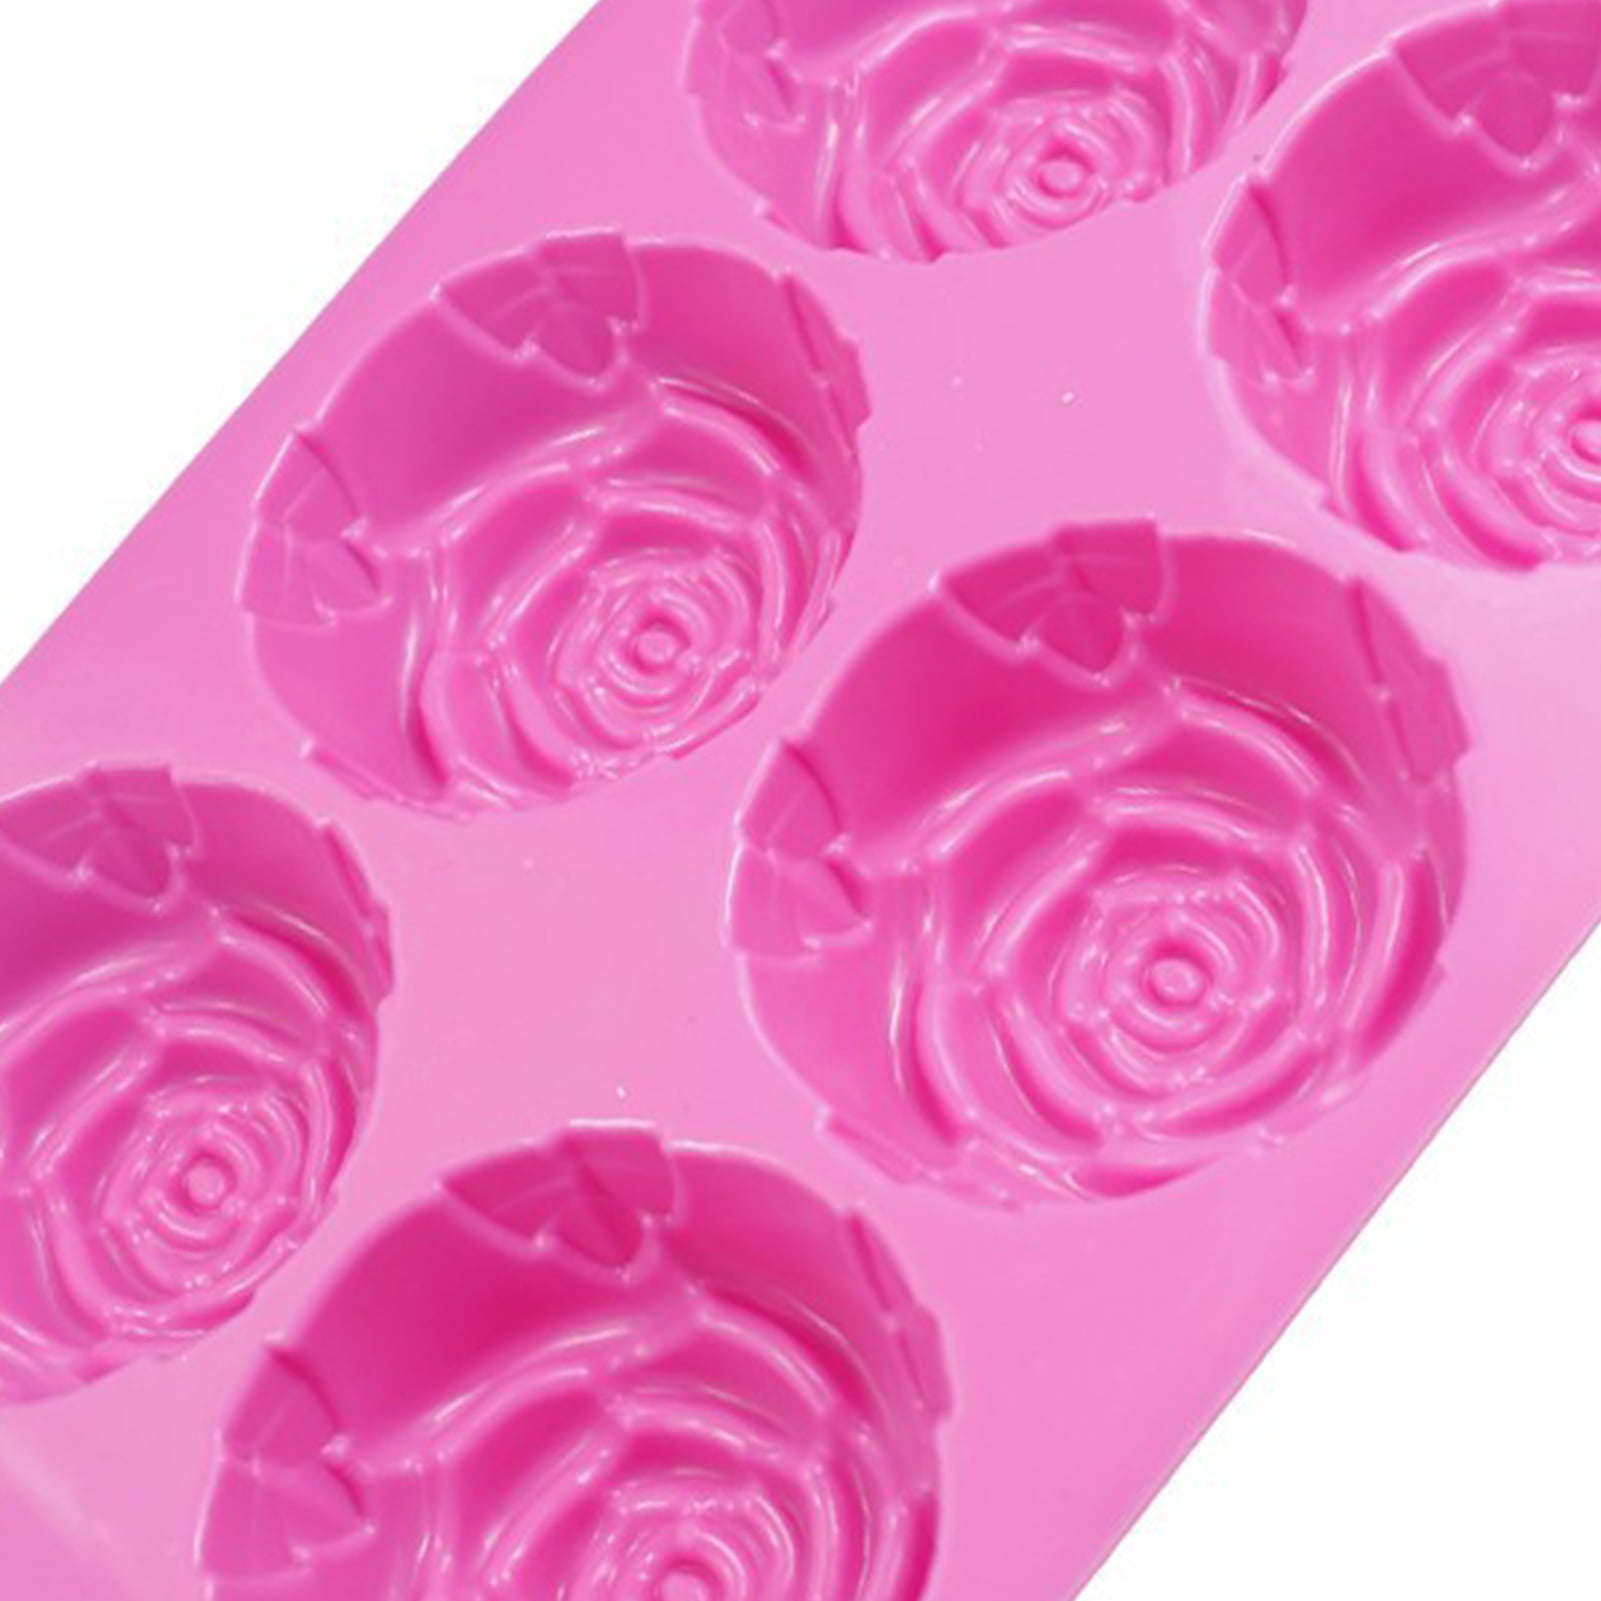 3D 6-Cavity Silicone Rose Mold – The Flour Girl